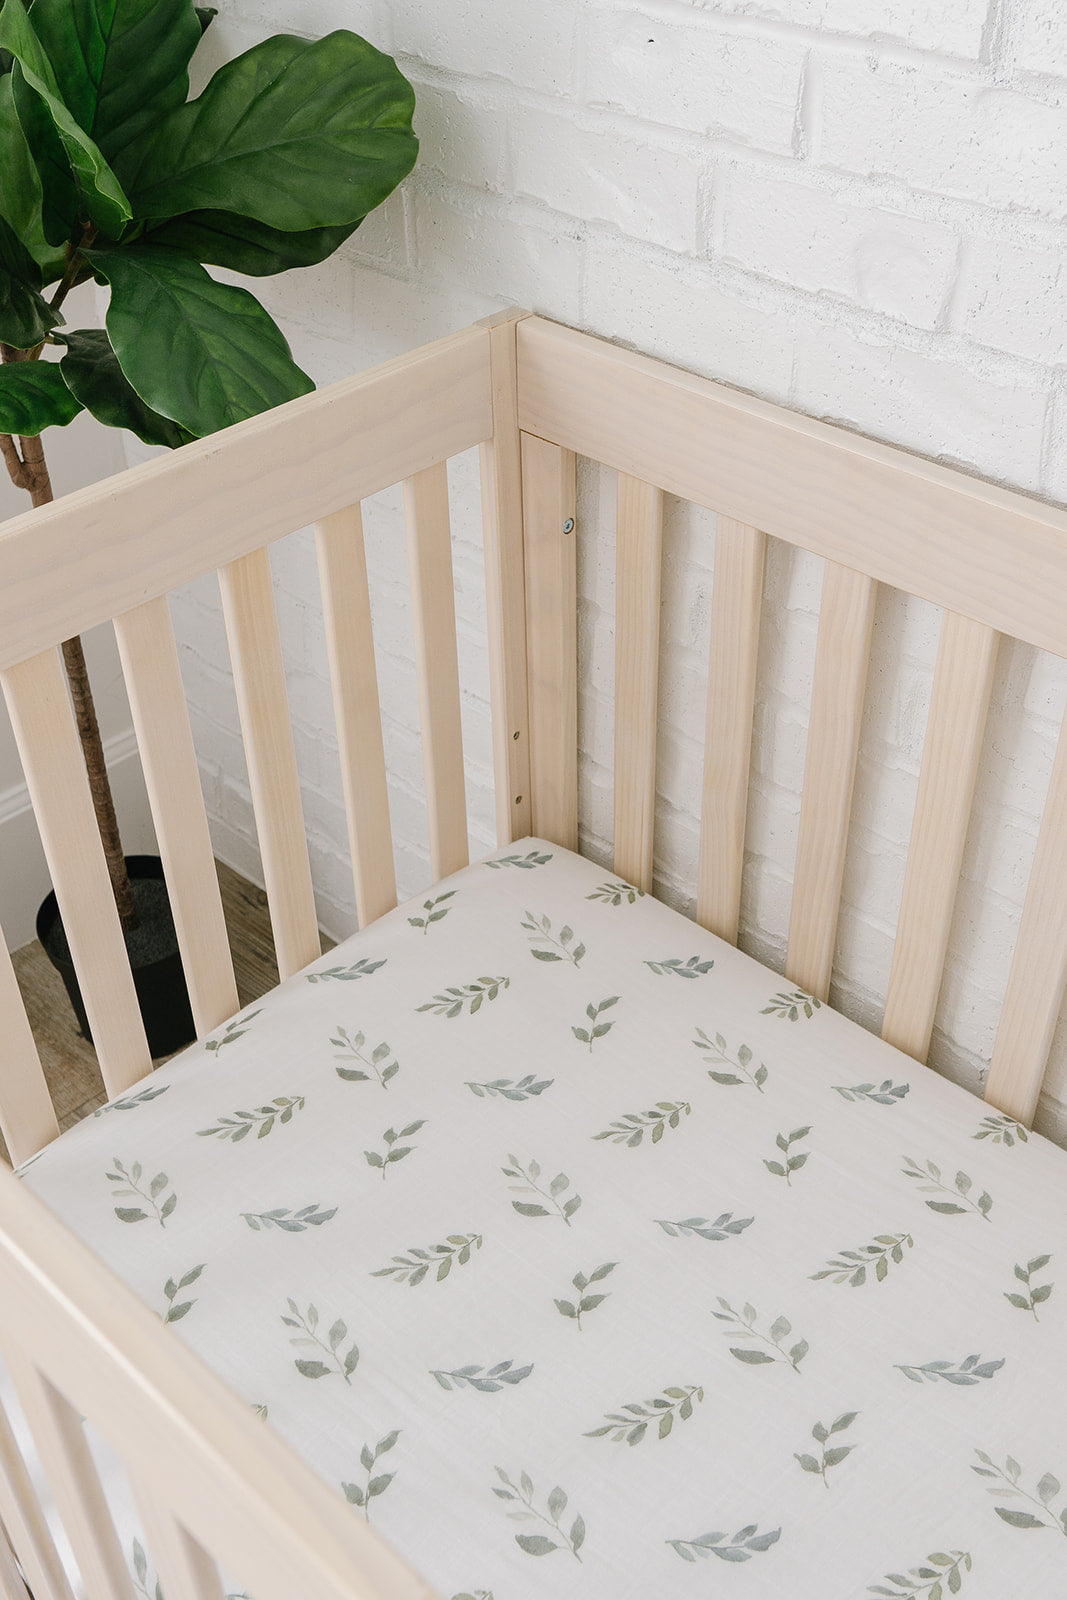 Fitted crib sheets | Harp Angel Boutique